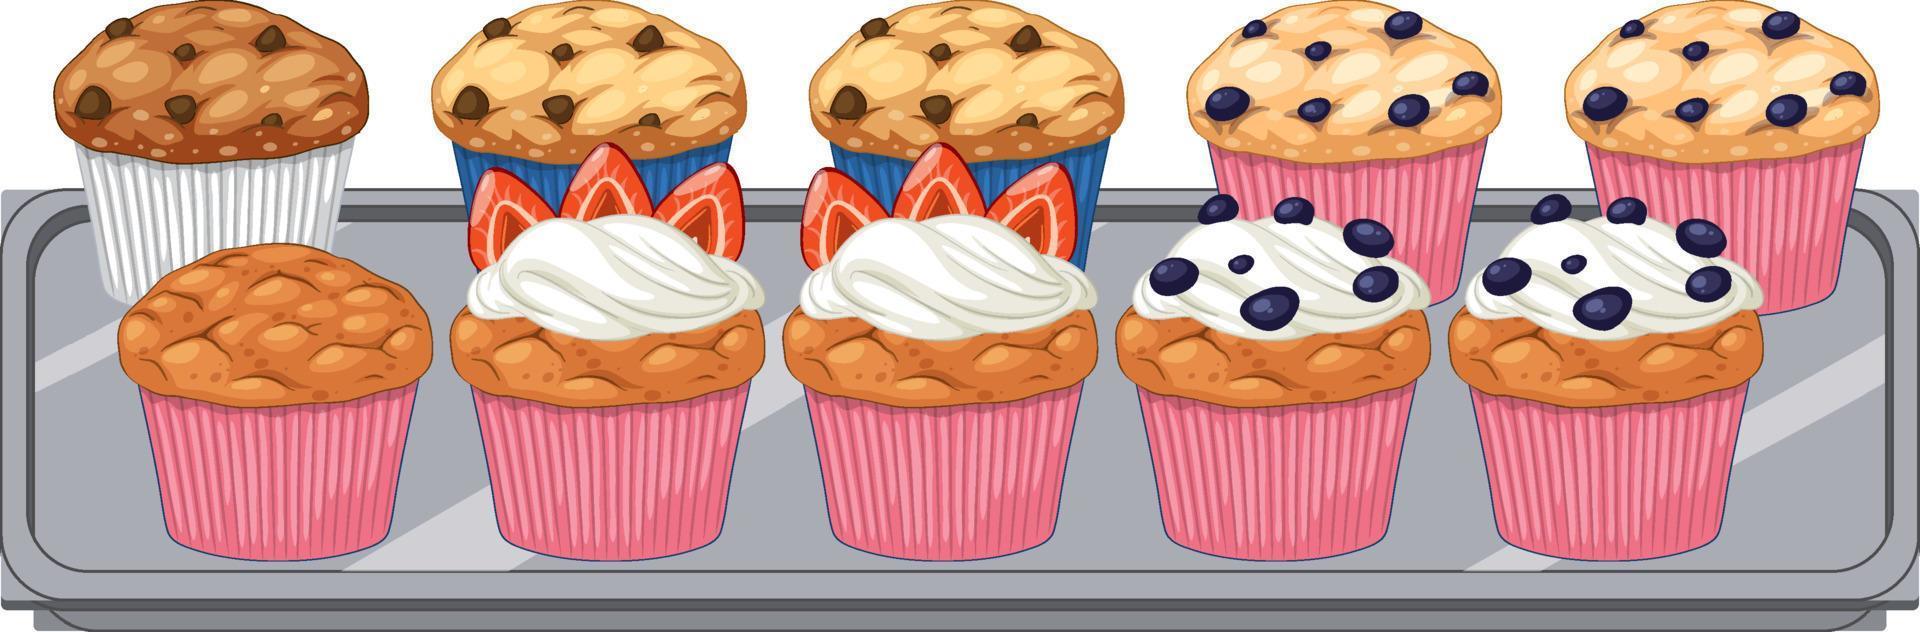 A tray of muffin cartoon vector